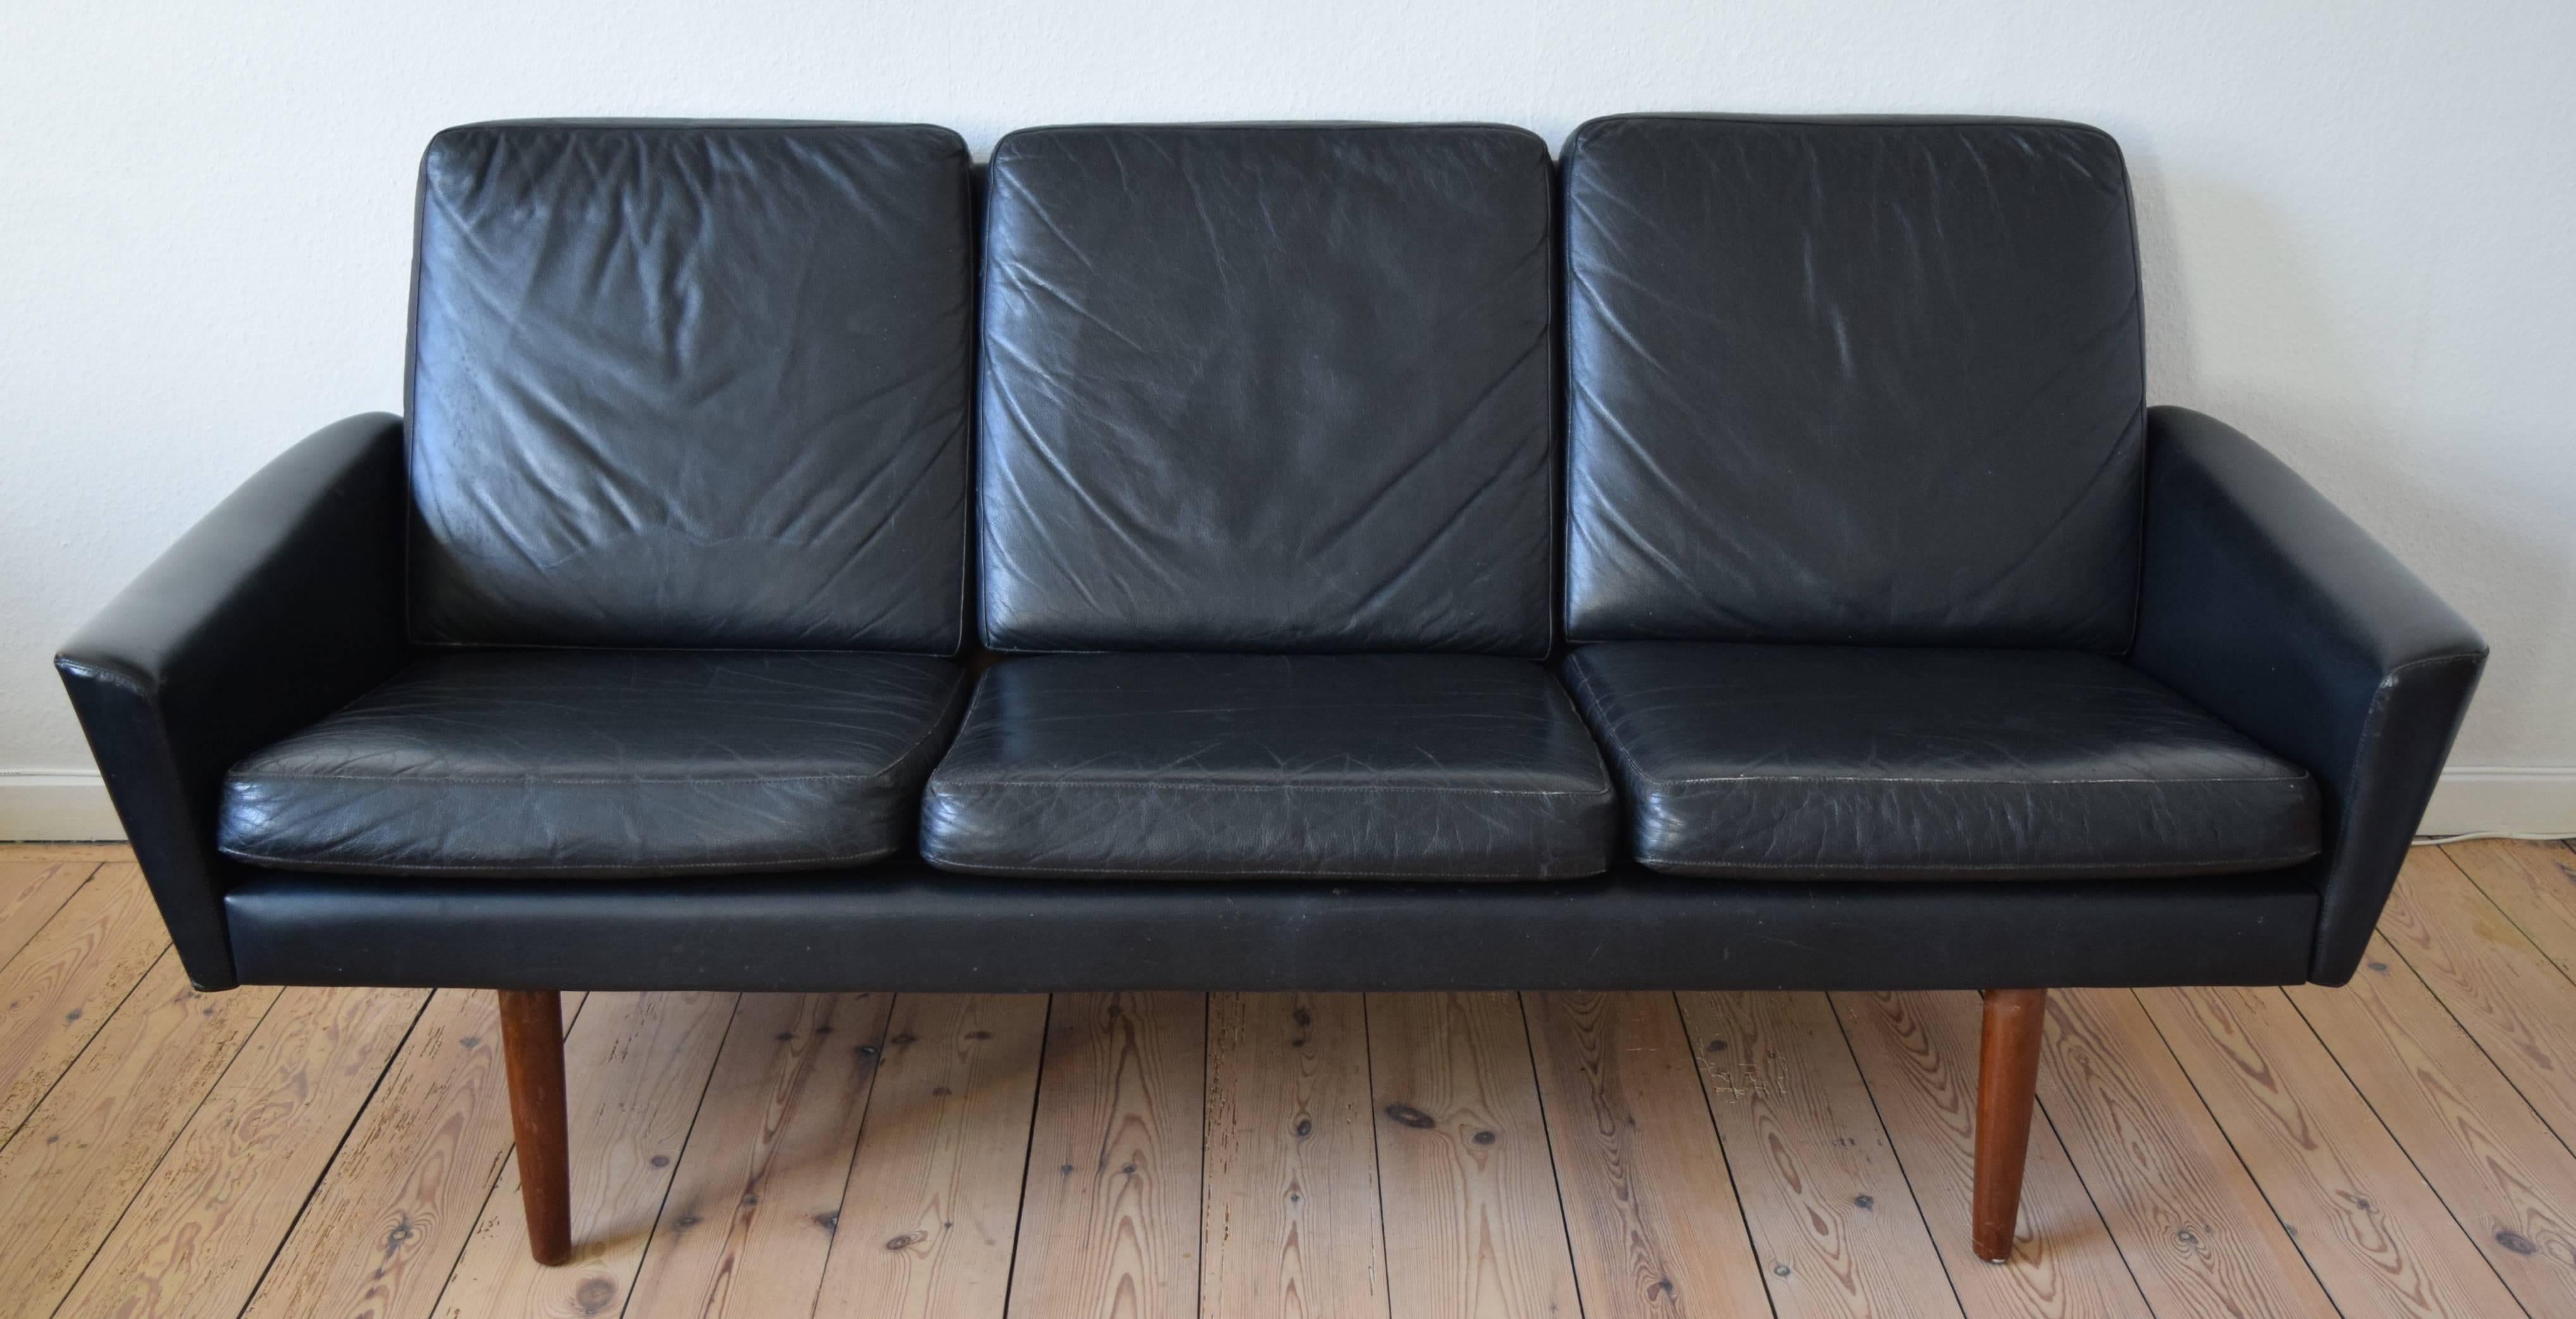 Leather three-person black sofa with teak legs manufactured in Denmark in the 1960s. The low slung design features angular lines and sits on solid teak legs. This is a genuine 1960s sofa in good condition with light wear for it's age. The sofa has